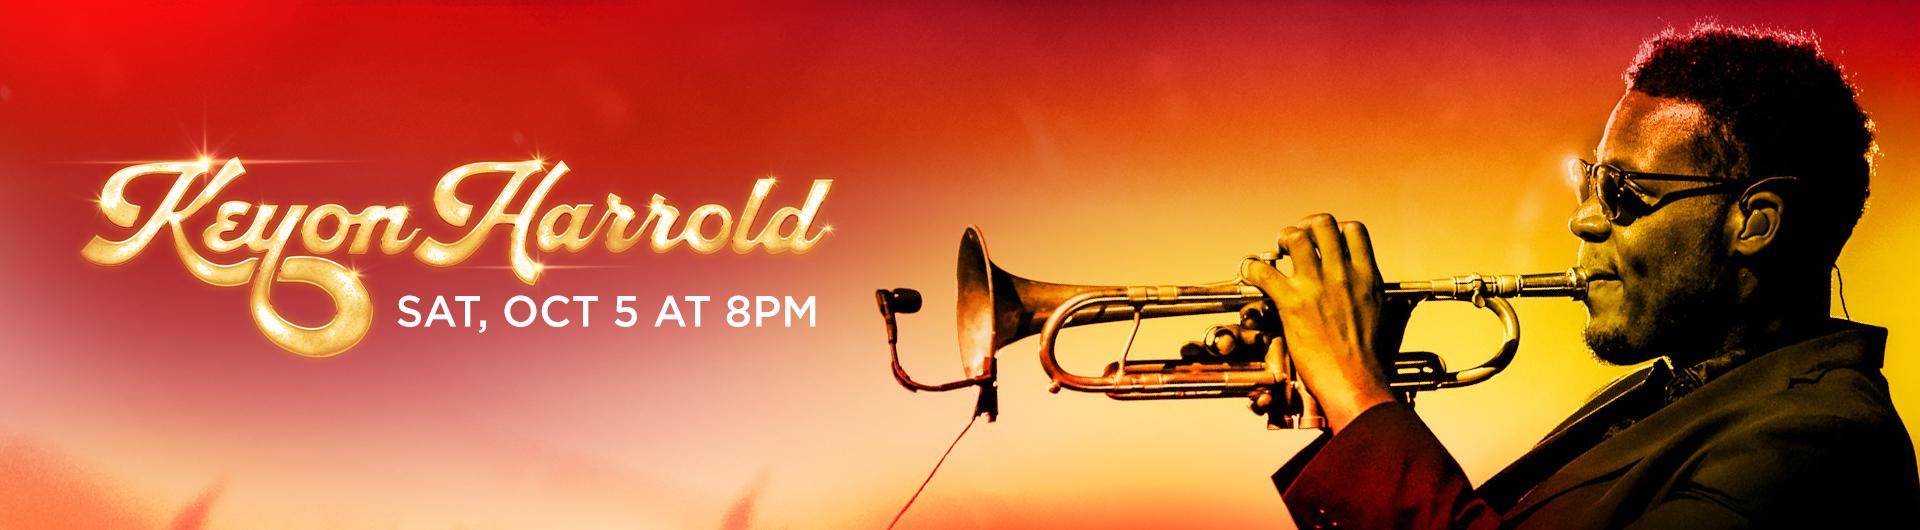 Keyon Harrold playing the trumpet against a gradient of warm colors